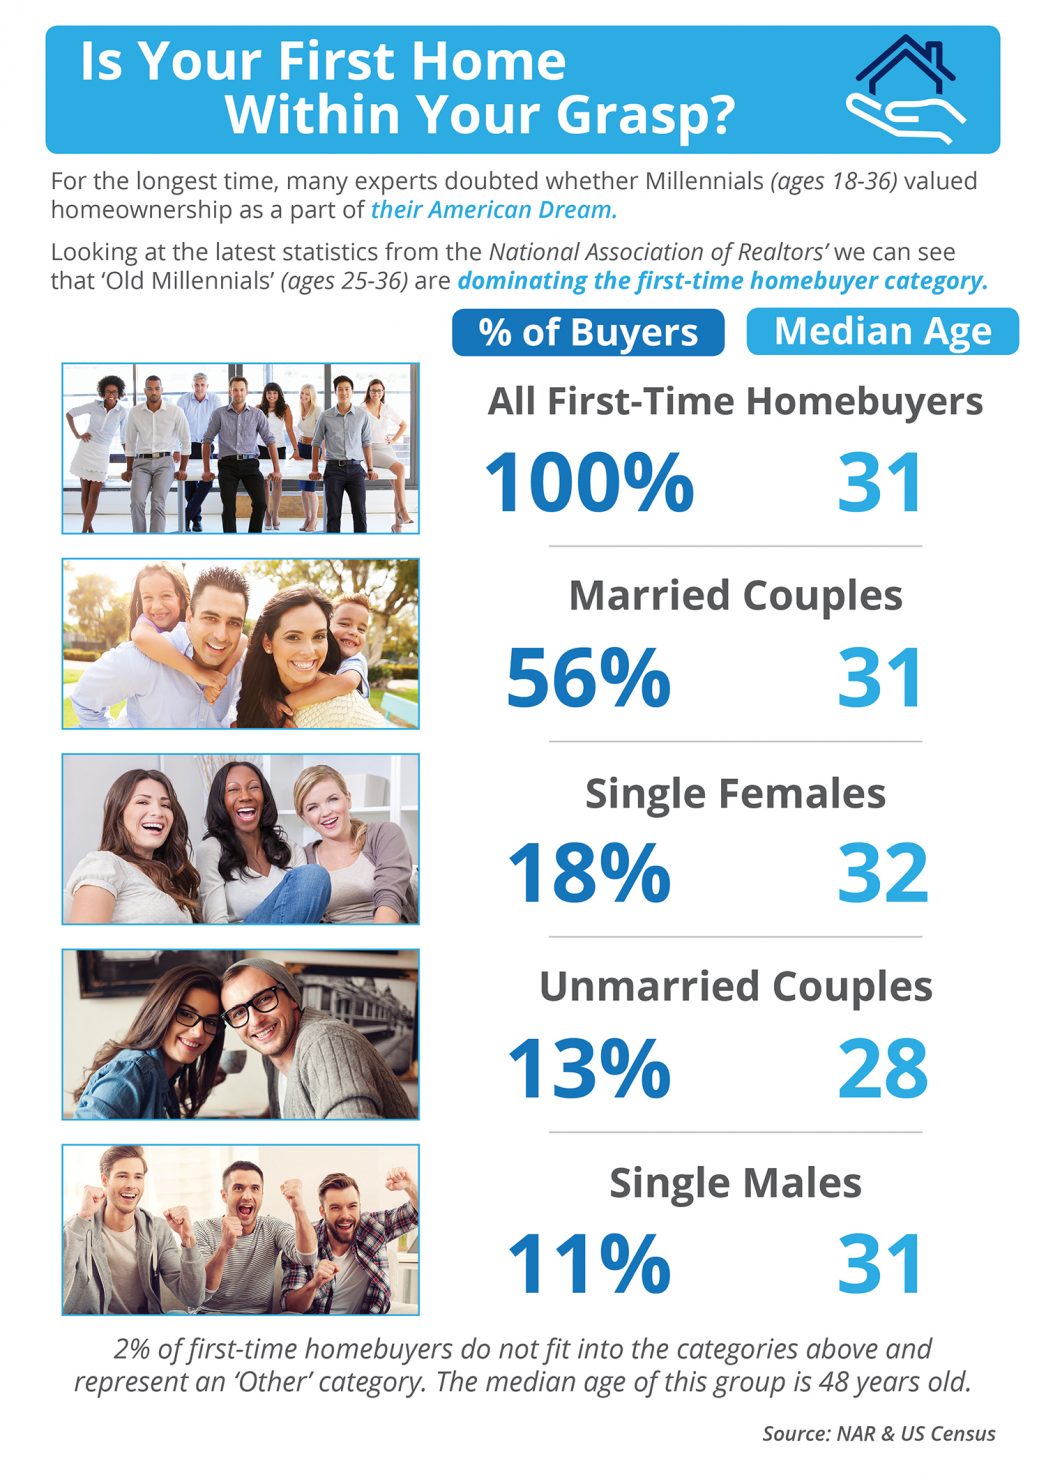 Is Your First Home Within Your Grasp? [INFOGRAPHIC] | MyKCM